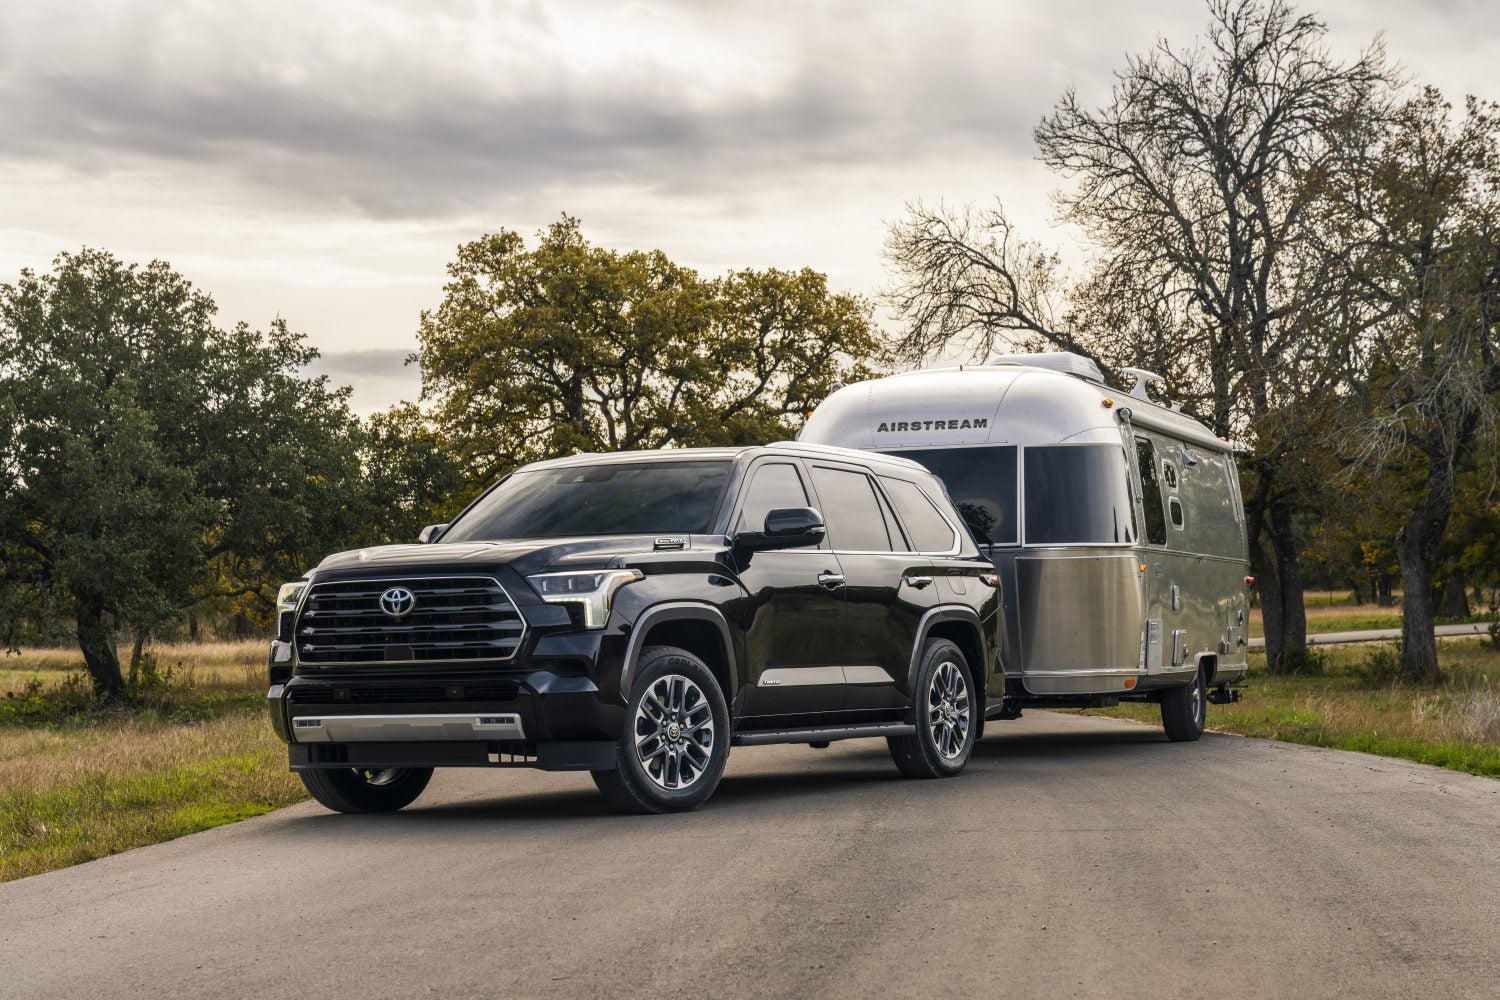 New 2023 Toyota Sequoia Towing Performance SUV - Falmouth Toyota of Bourne, MA - Serving Cape Cod, Hyannis, Plymouth MA